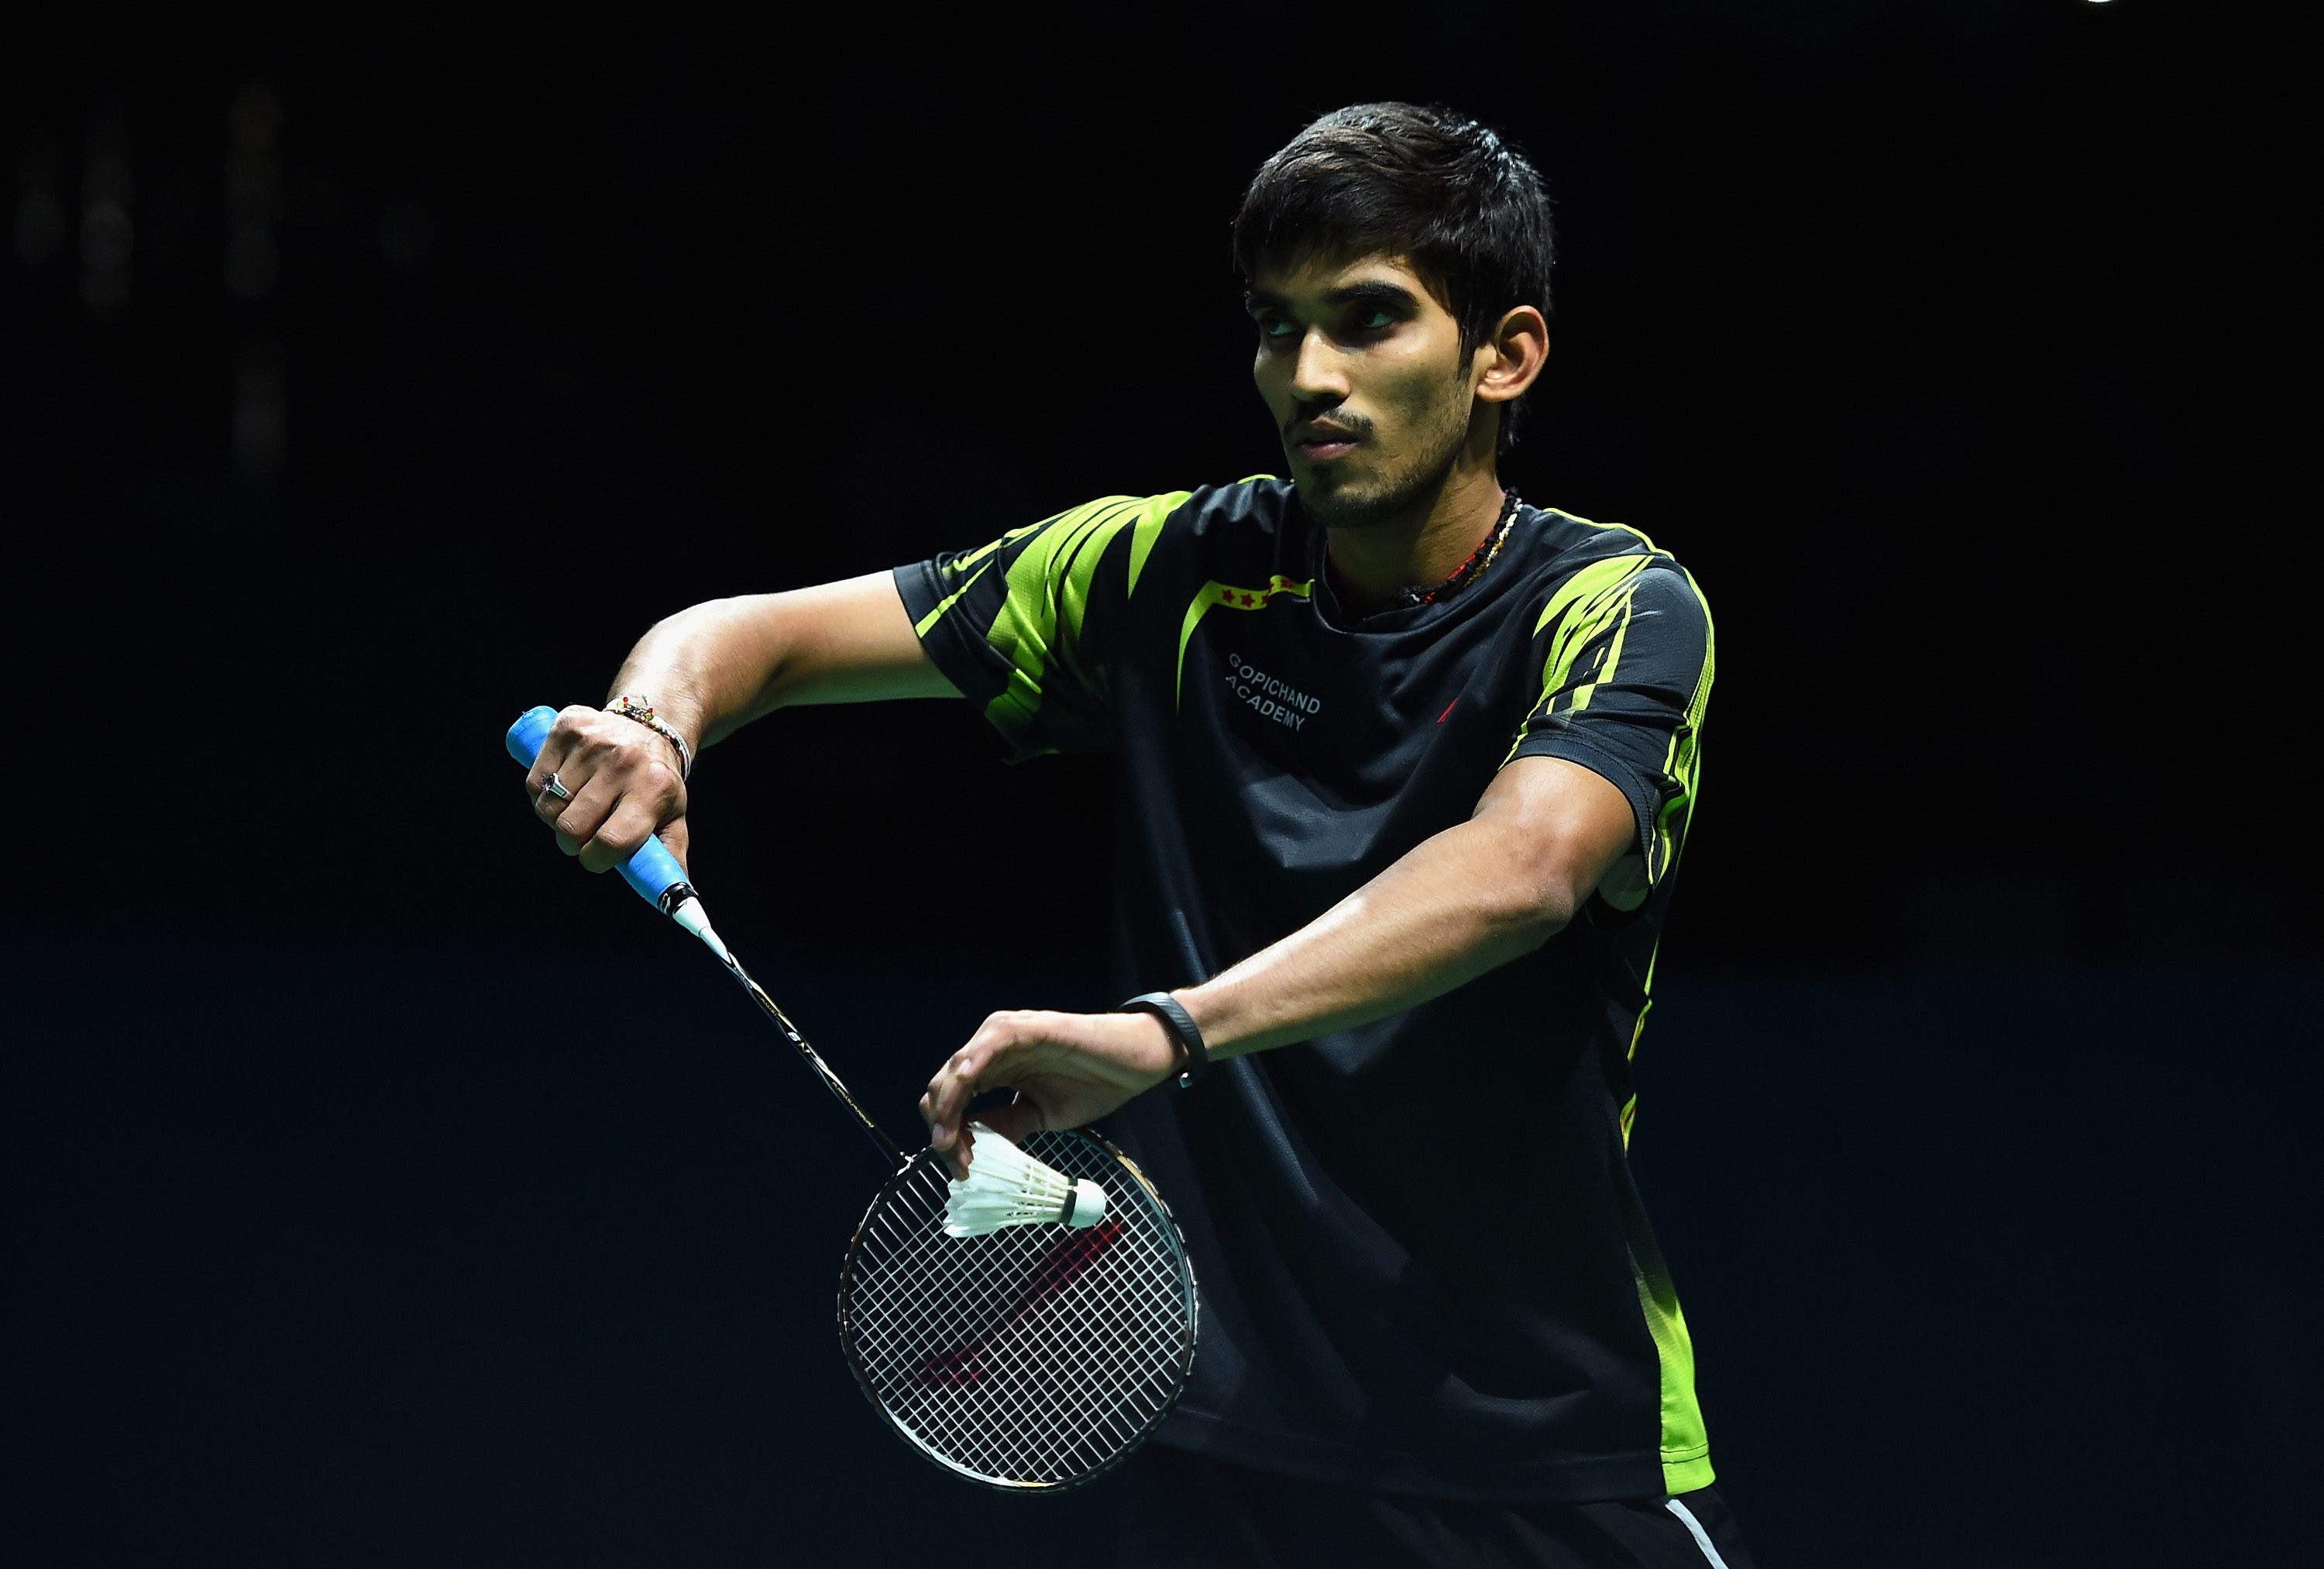 Swiss Open 2021 | Kidambi Srikanth and Sourabh Verma enter second round, HS Prannoy eliminated